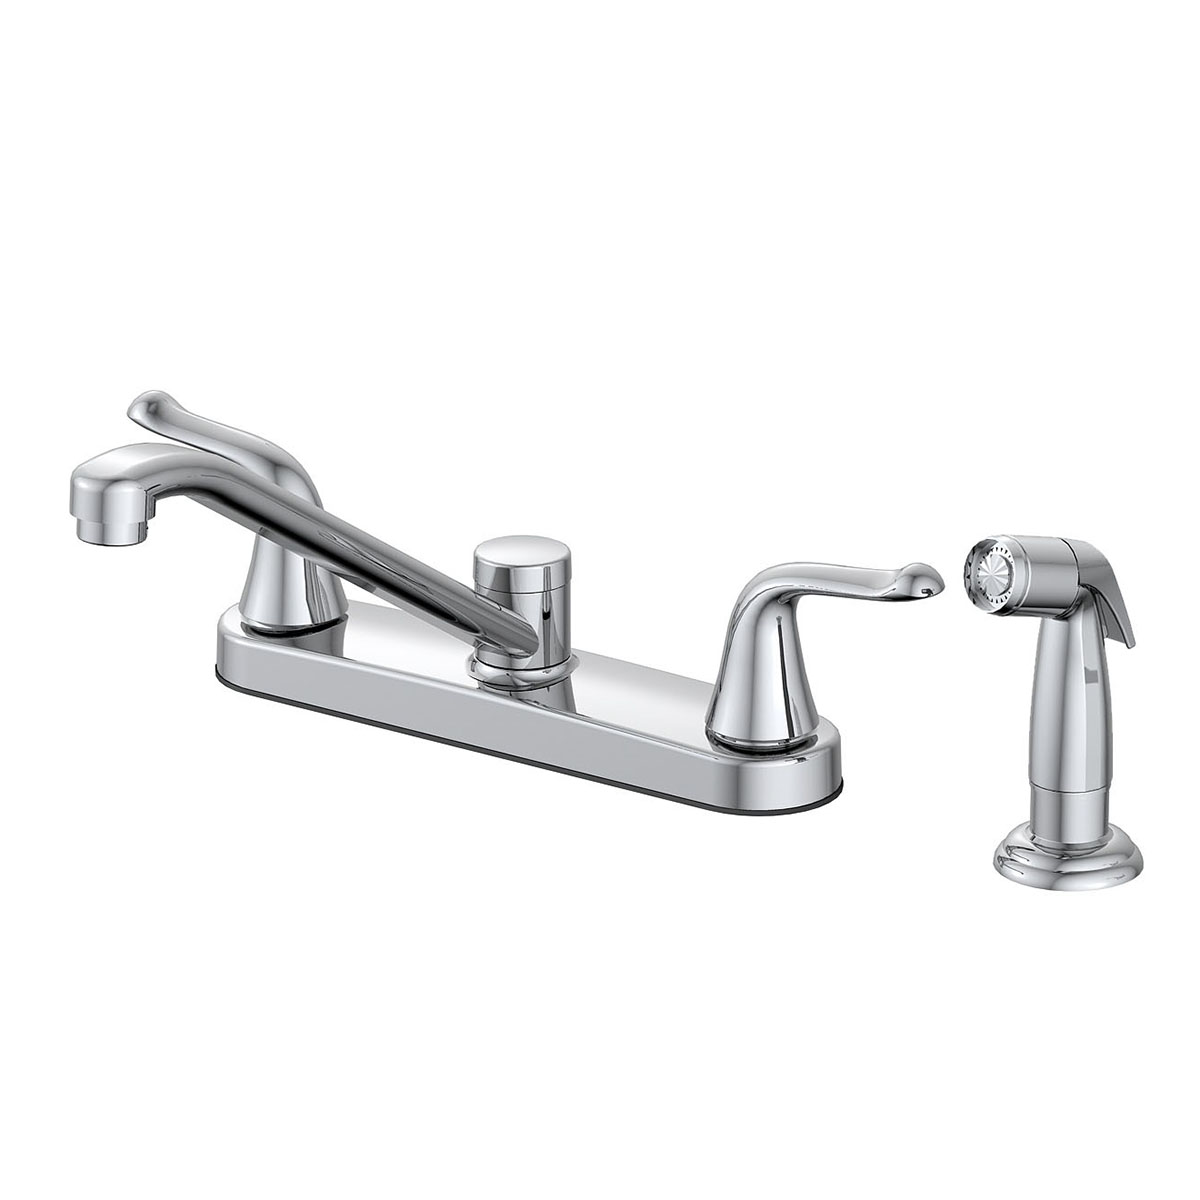 Stainless Steel Commercial Kitchen Faucet with Soap Dispenser